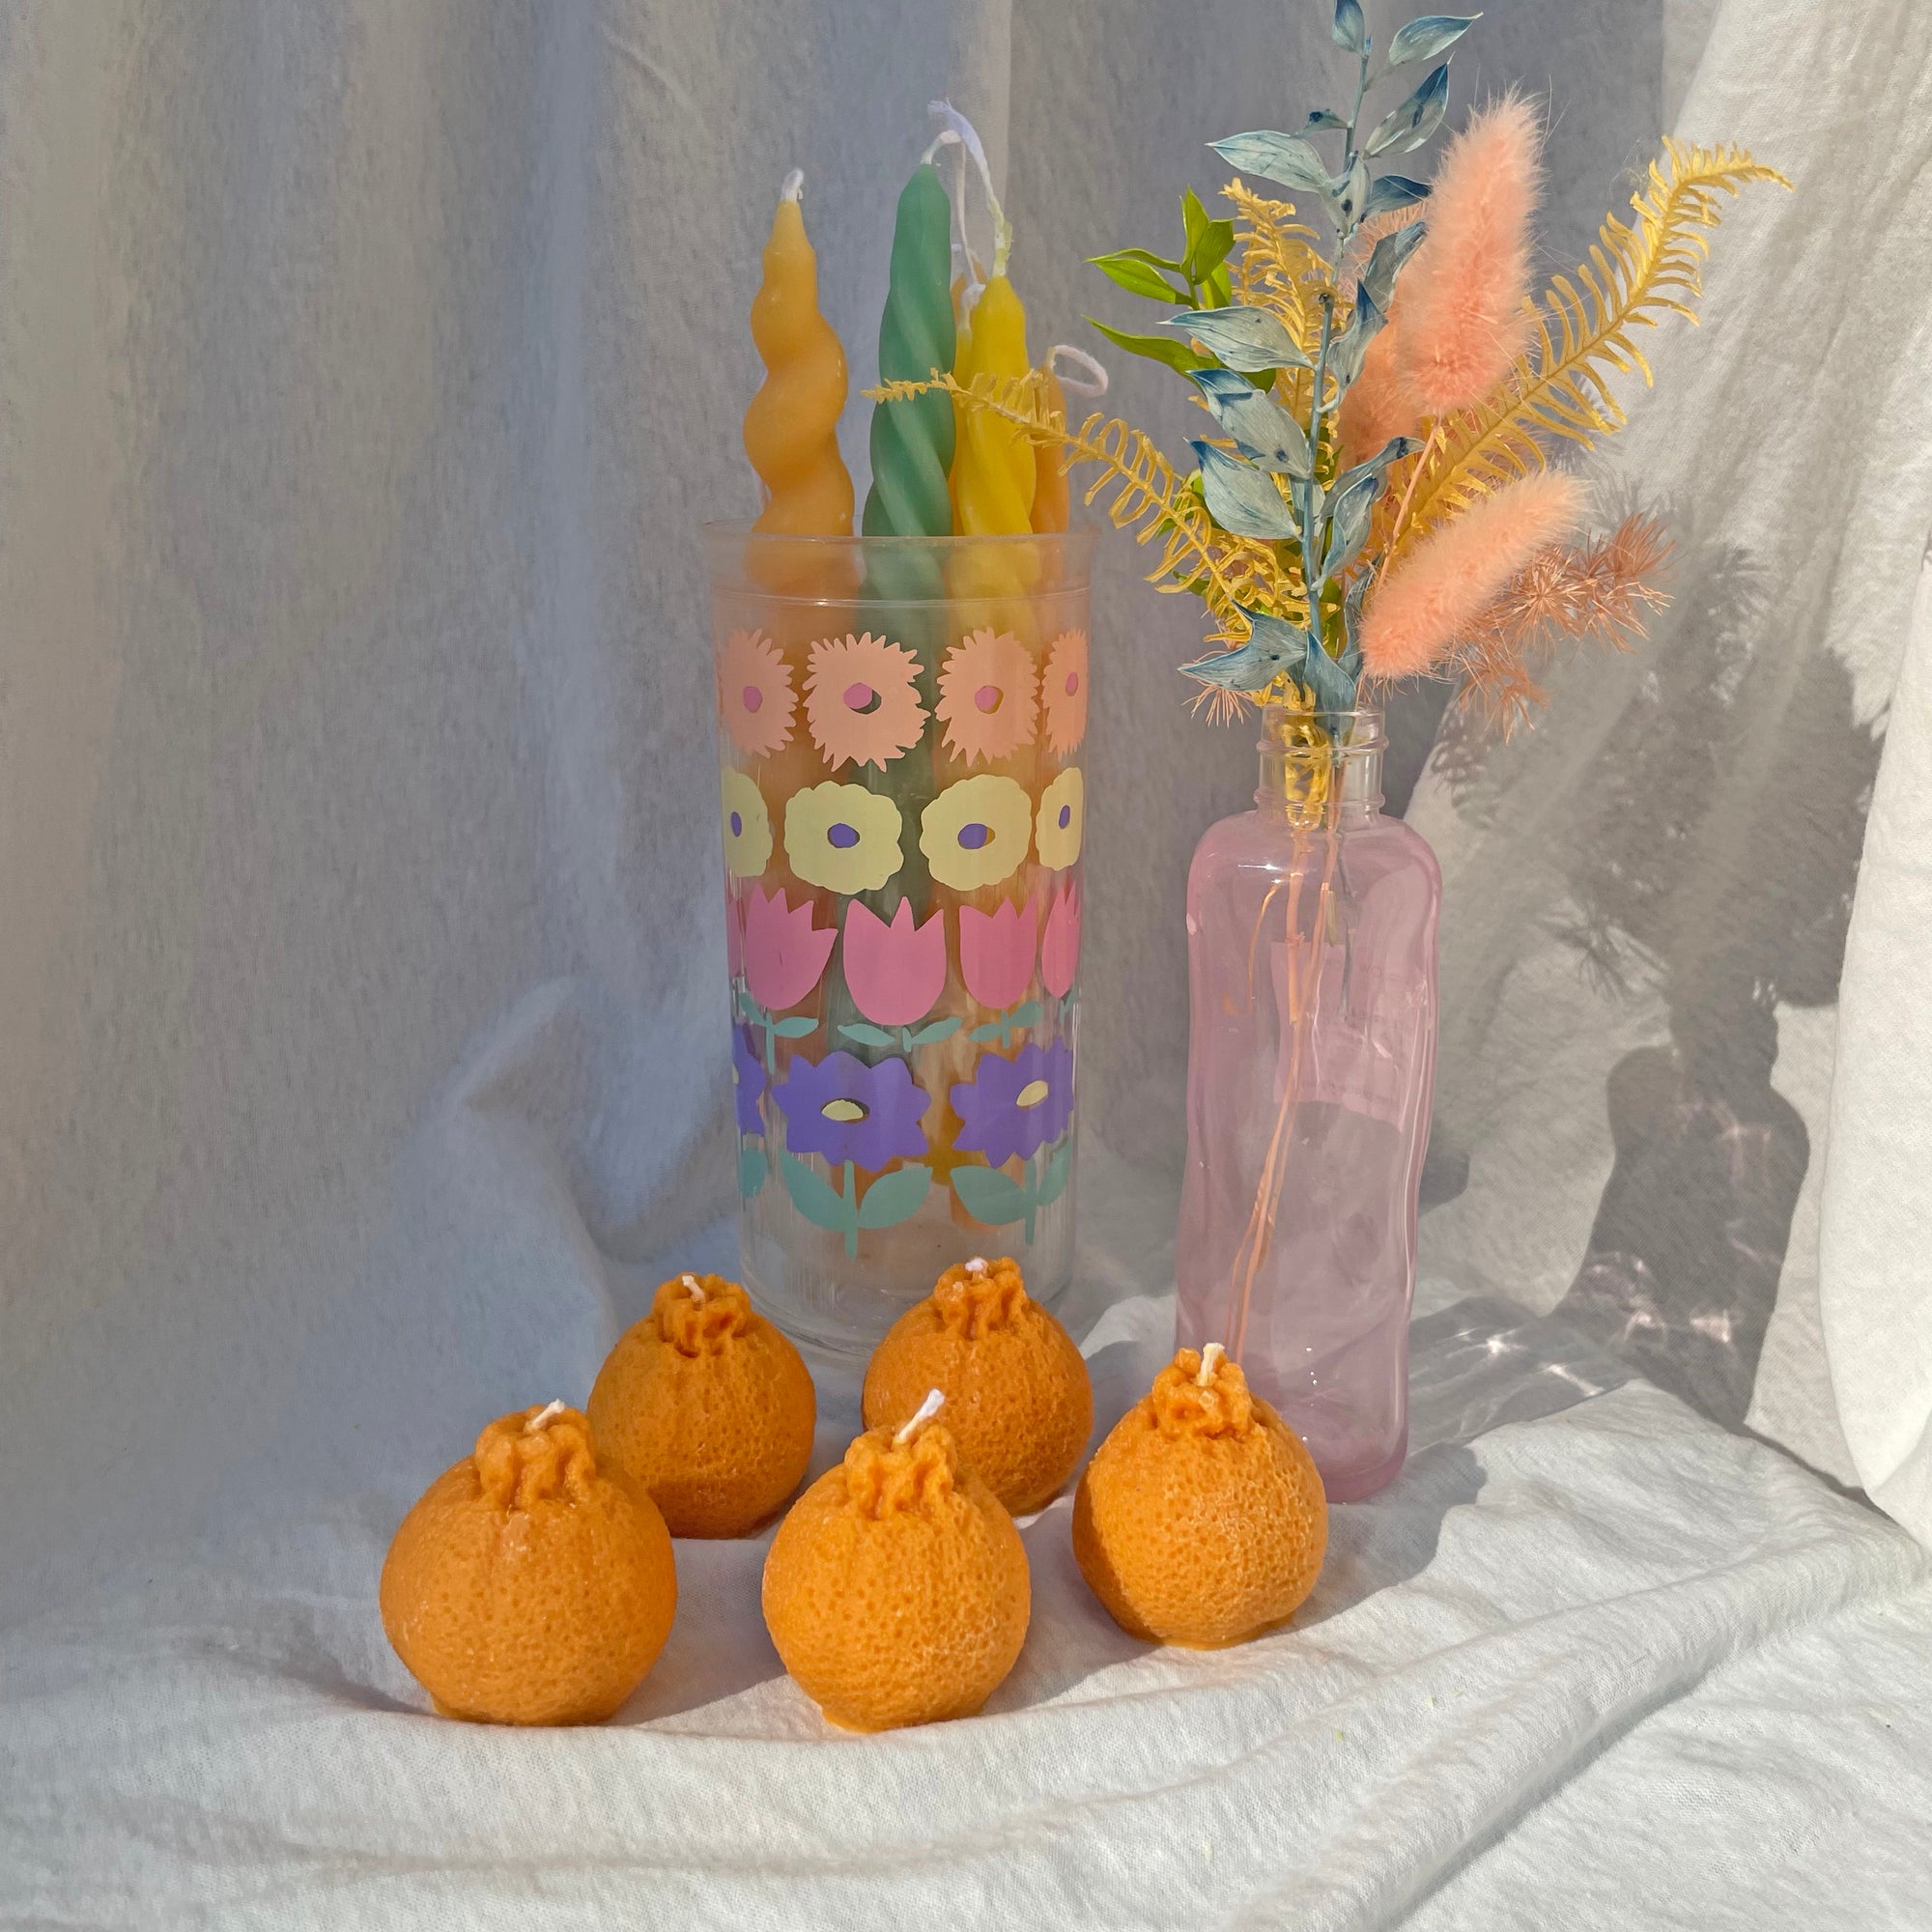 【Ready to ship】3 Piece Fruit candle pack